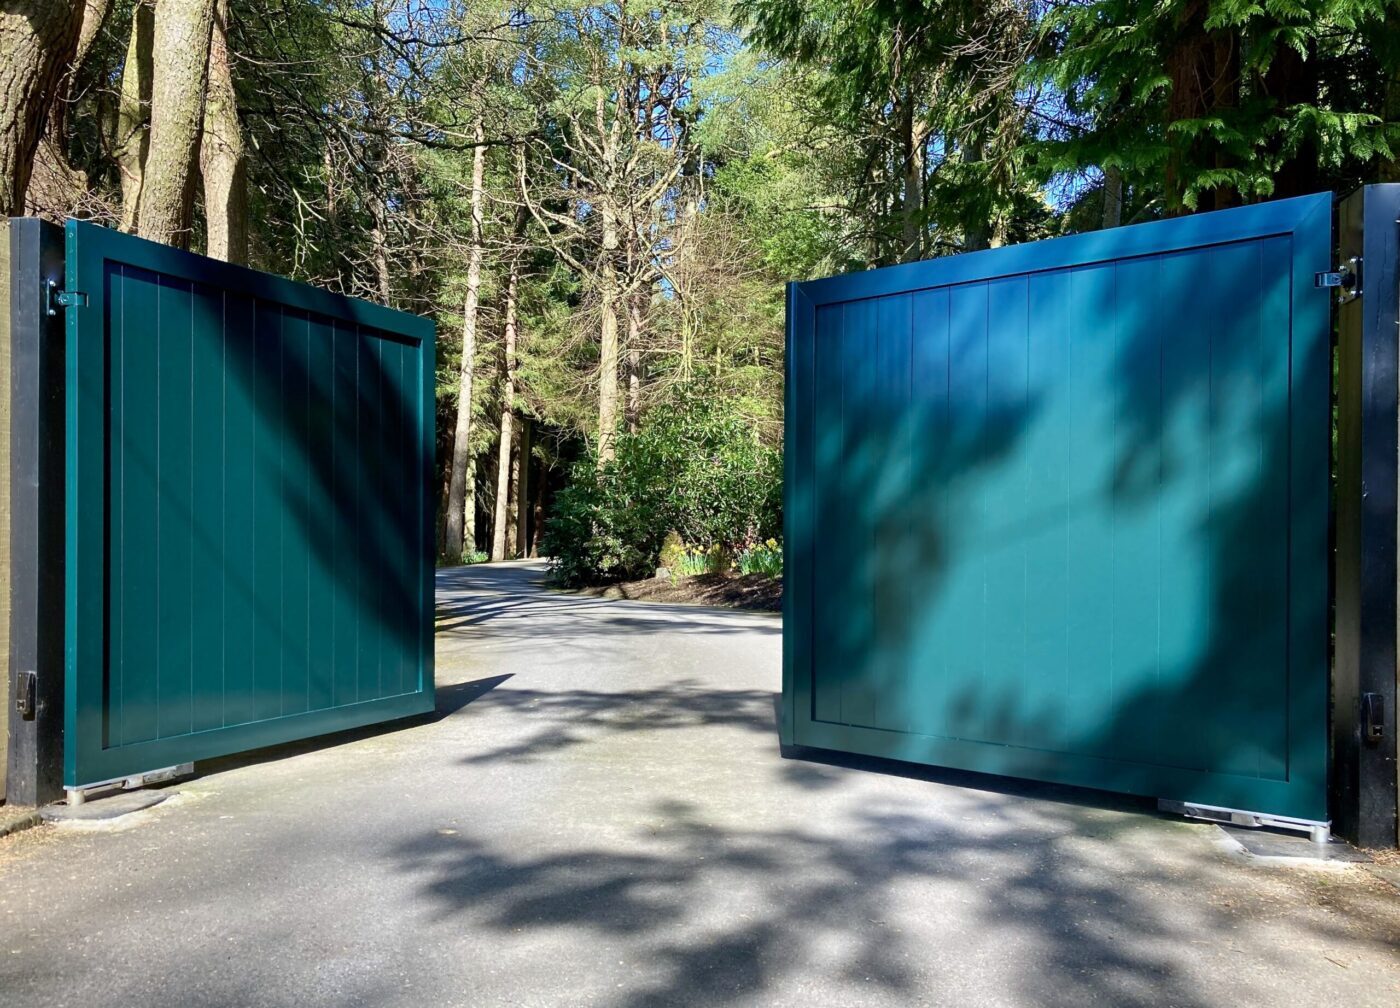 AES recently installed aluminium driveway gates in Gleneagles